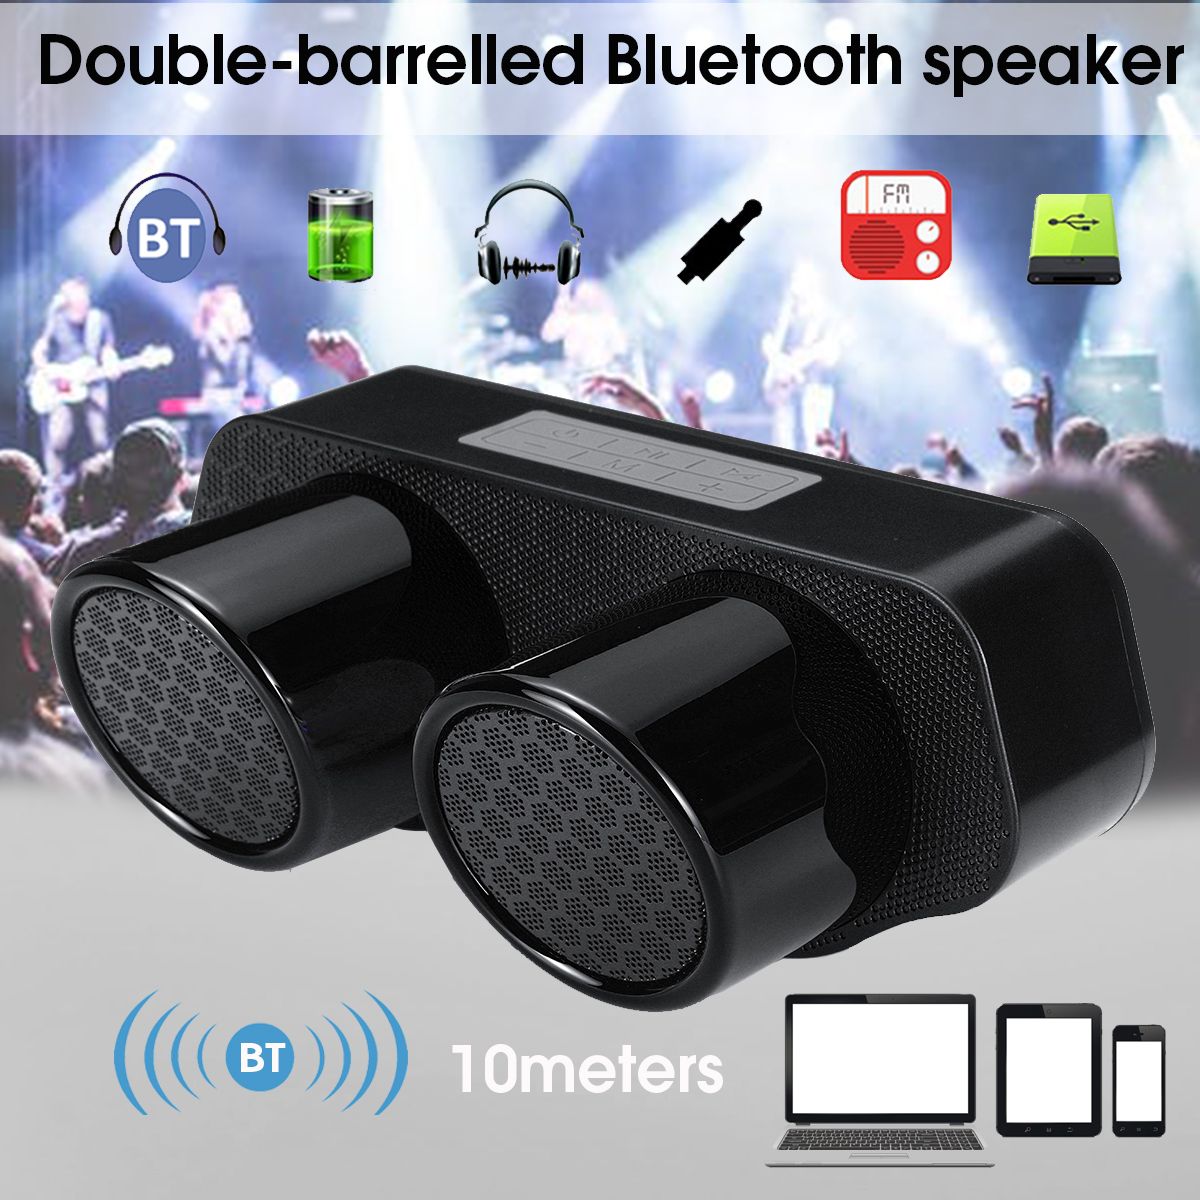 Rechargeable-Portable-Wireless-bluetooth-Speaker-FM-Radio-TF-Card-CSR50-Super-Bass-Sound-Stereo-Spea-1427727